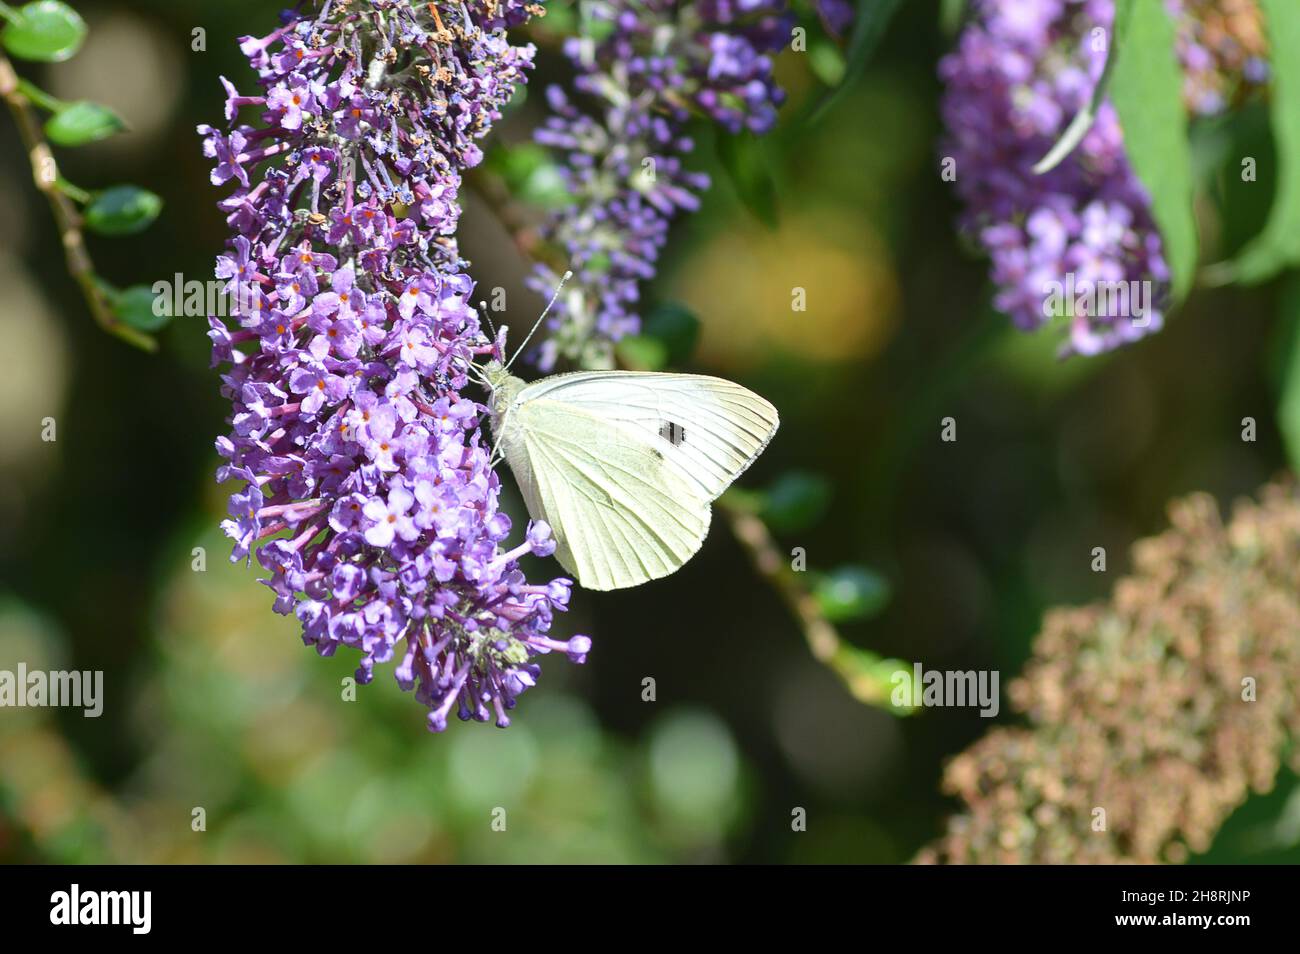 A cabbage white (or cabbage or small white) butterfly (Pieris rapae) on the blossom of a buddleia or summer lilac bush (Buddleja davidii) in Scotland. Stock Photo